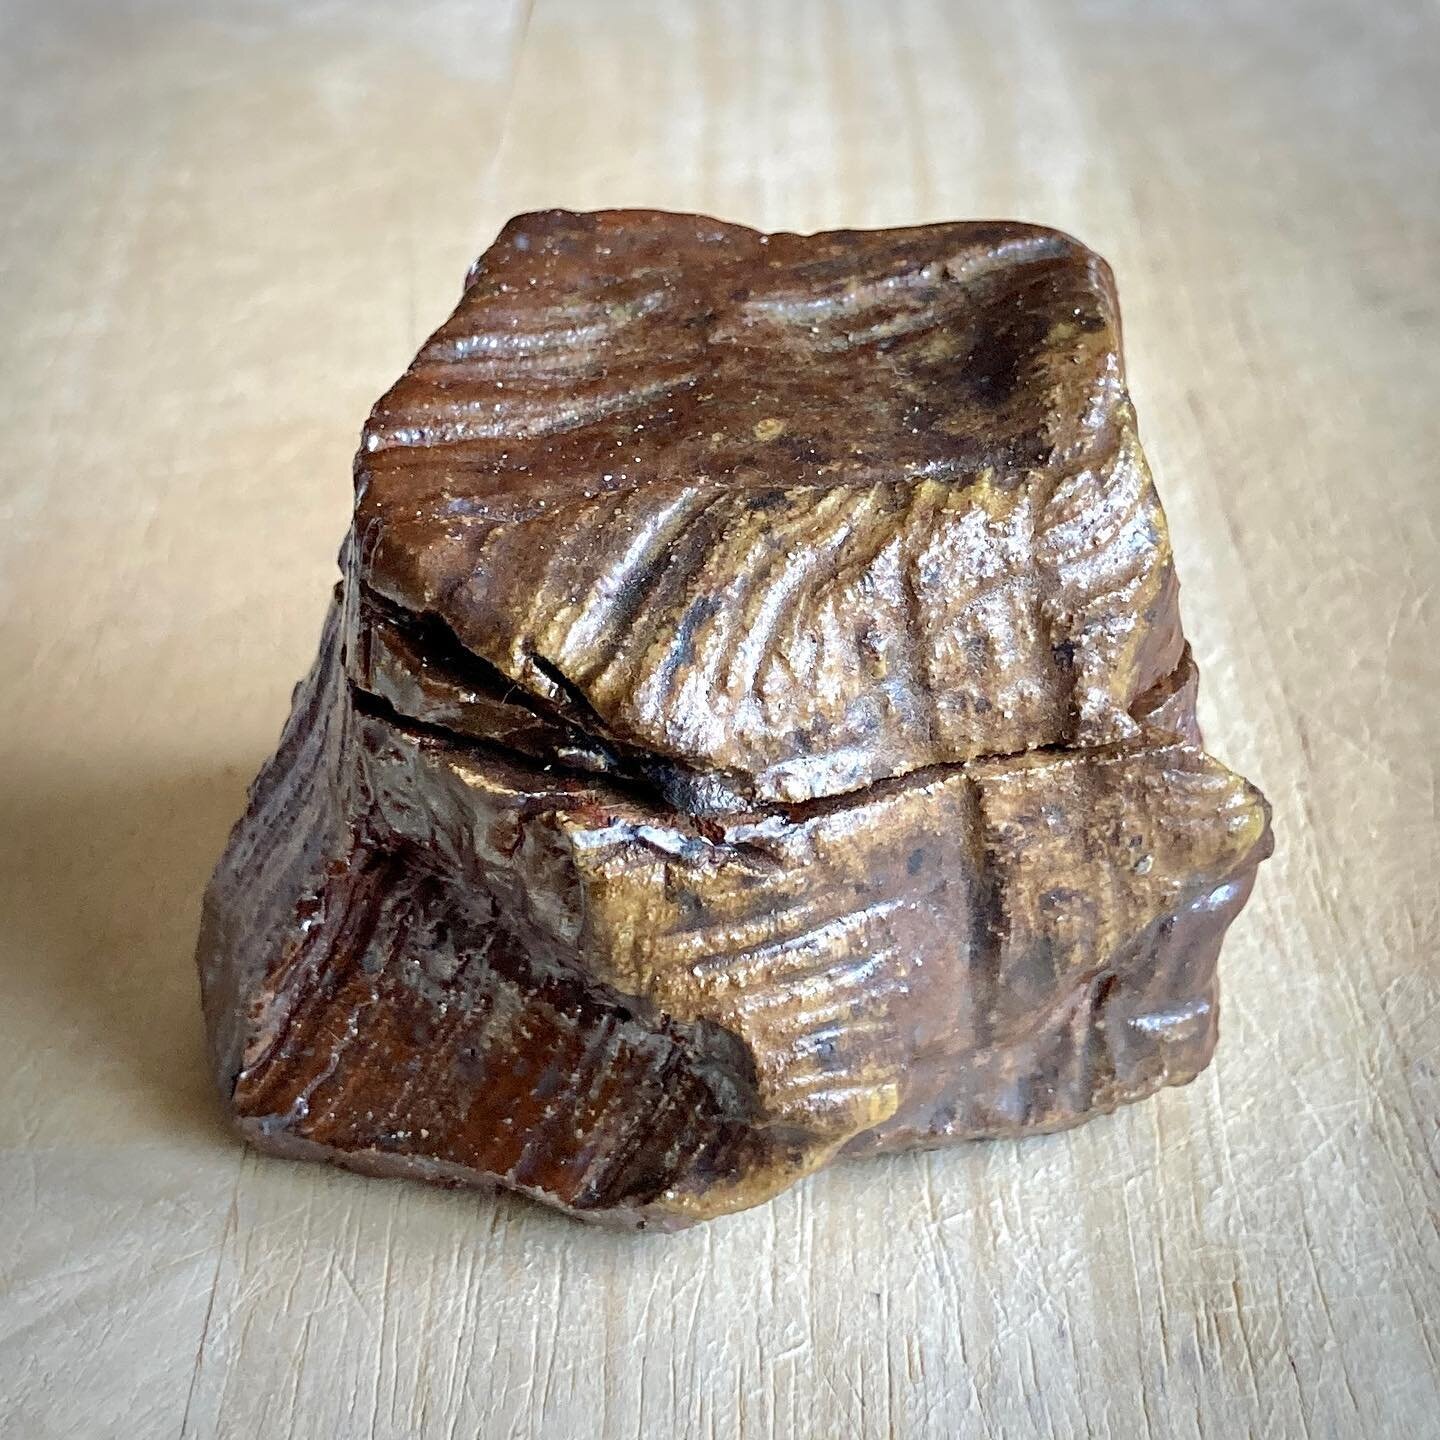 Good to see another one of these pieces, which have been in a two year bisque stasis, come to fruition.
.
This was the first little box I cut (flick through the photos to see it in the greenware state and the tools I used to cut it).
.
I was barefoot